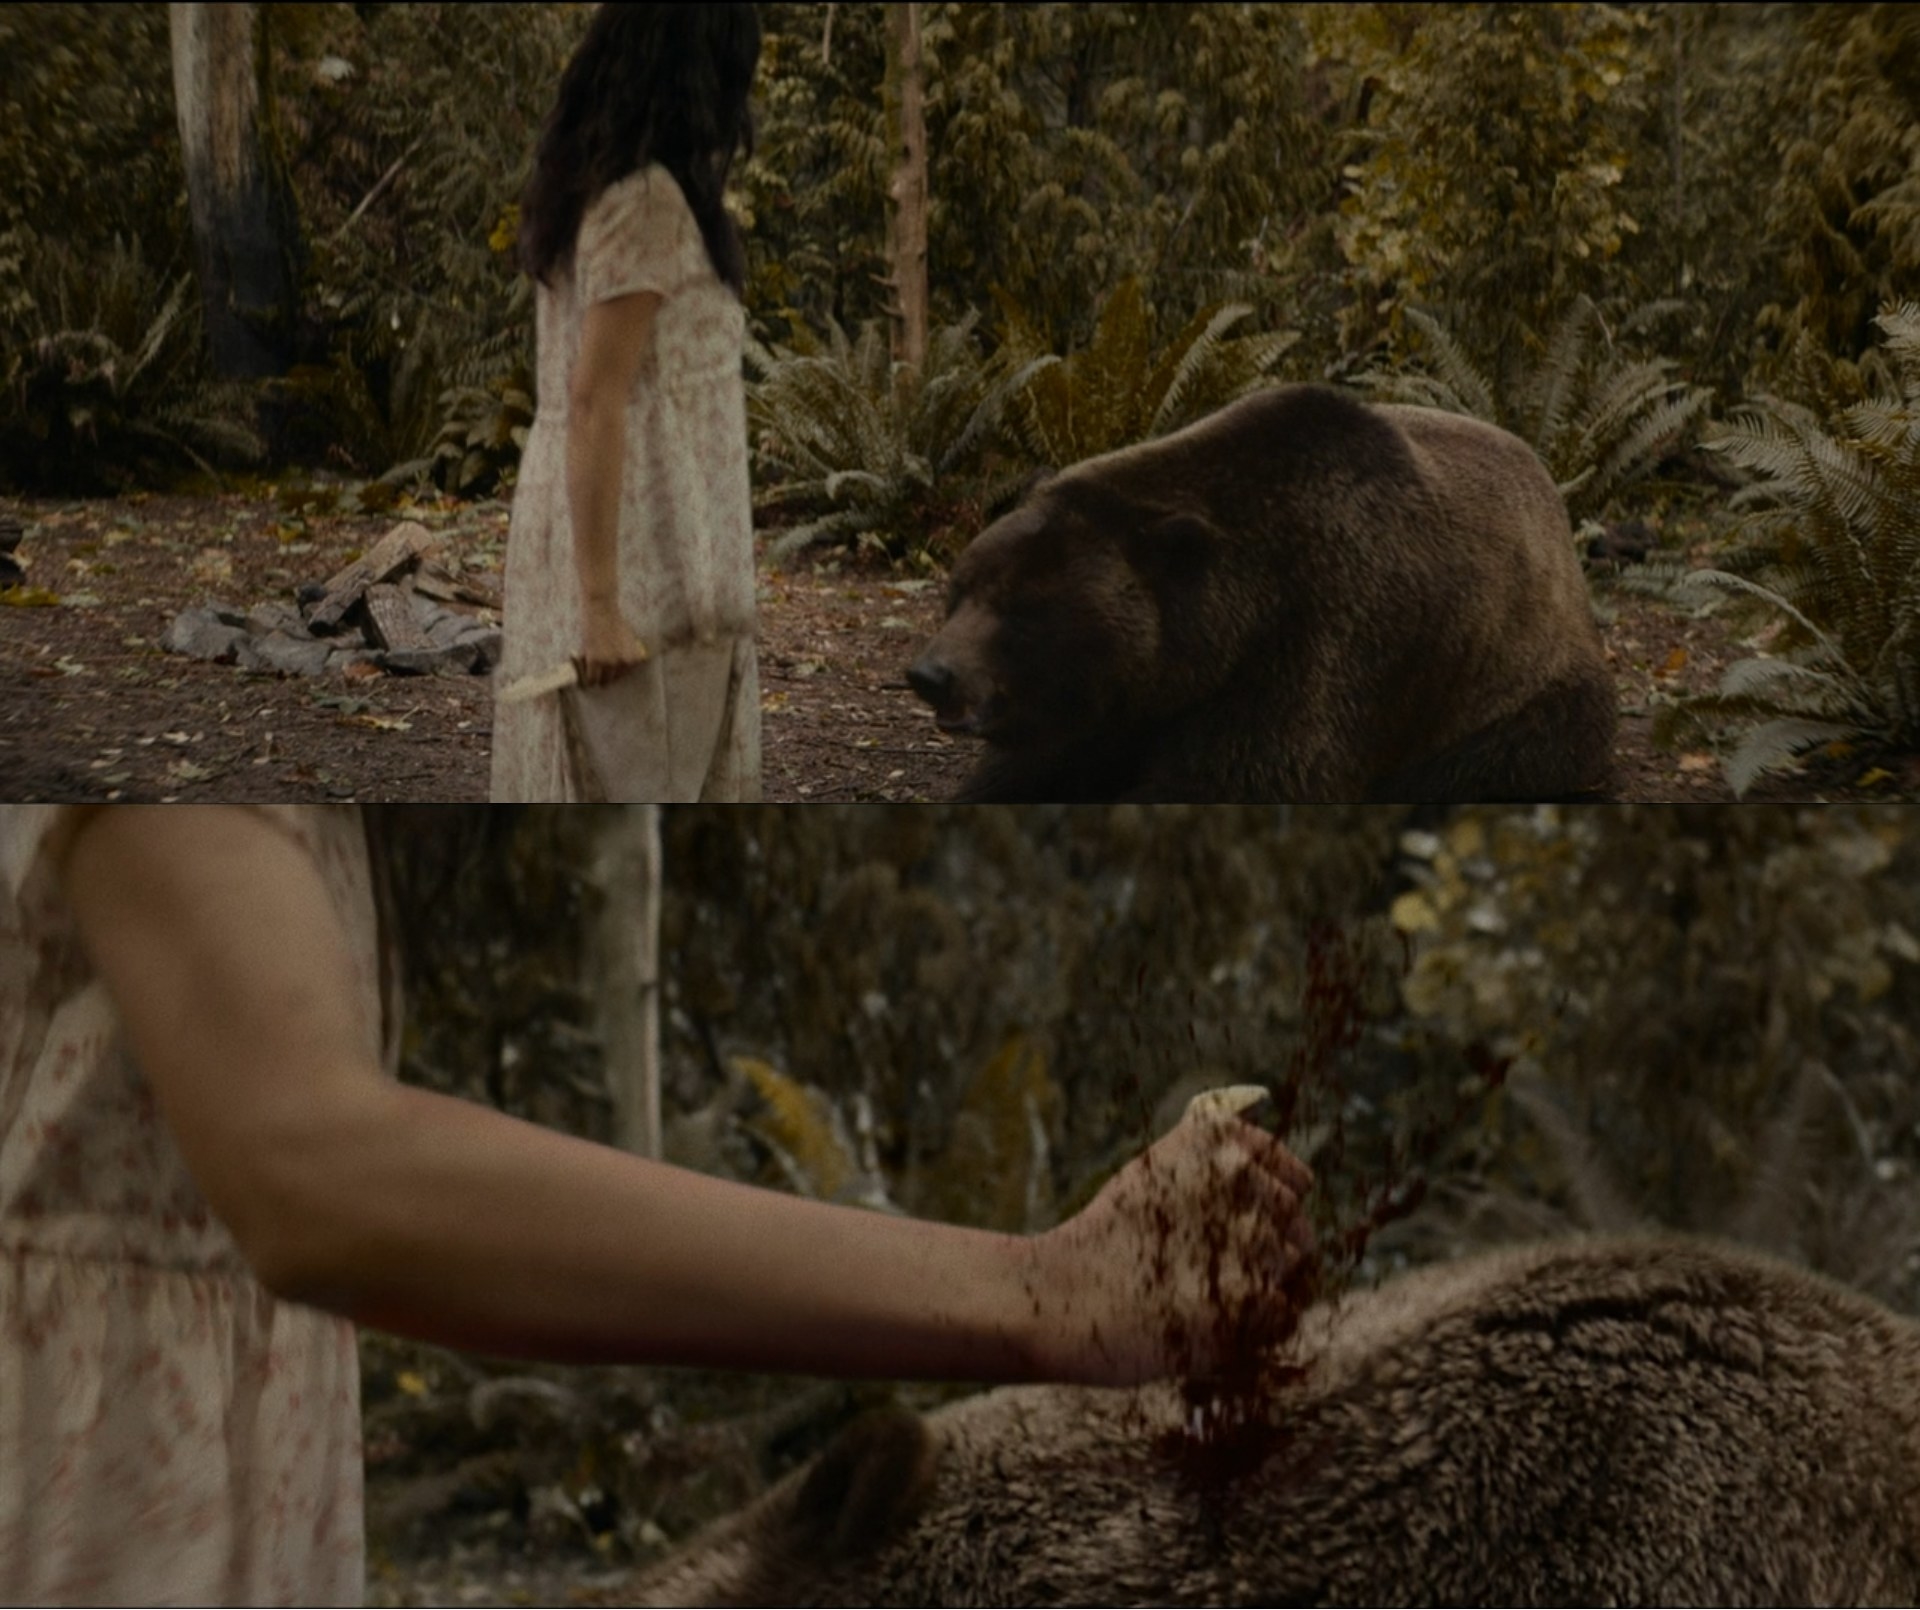 A bear meekly crouches in front of a girl who then stabs the bear